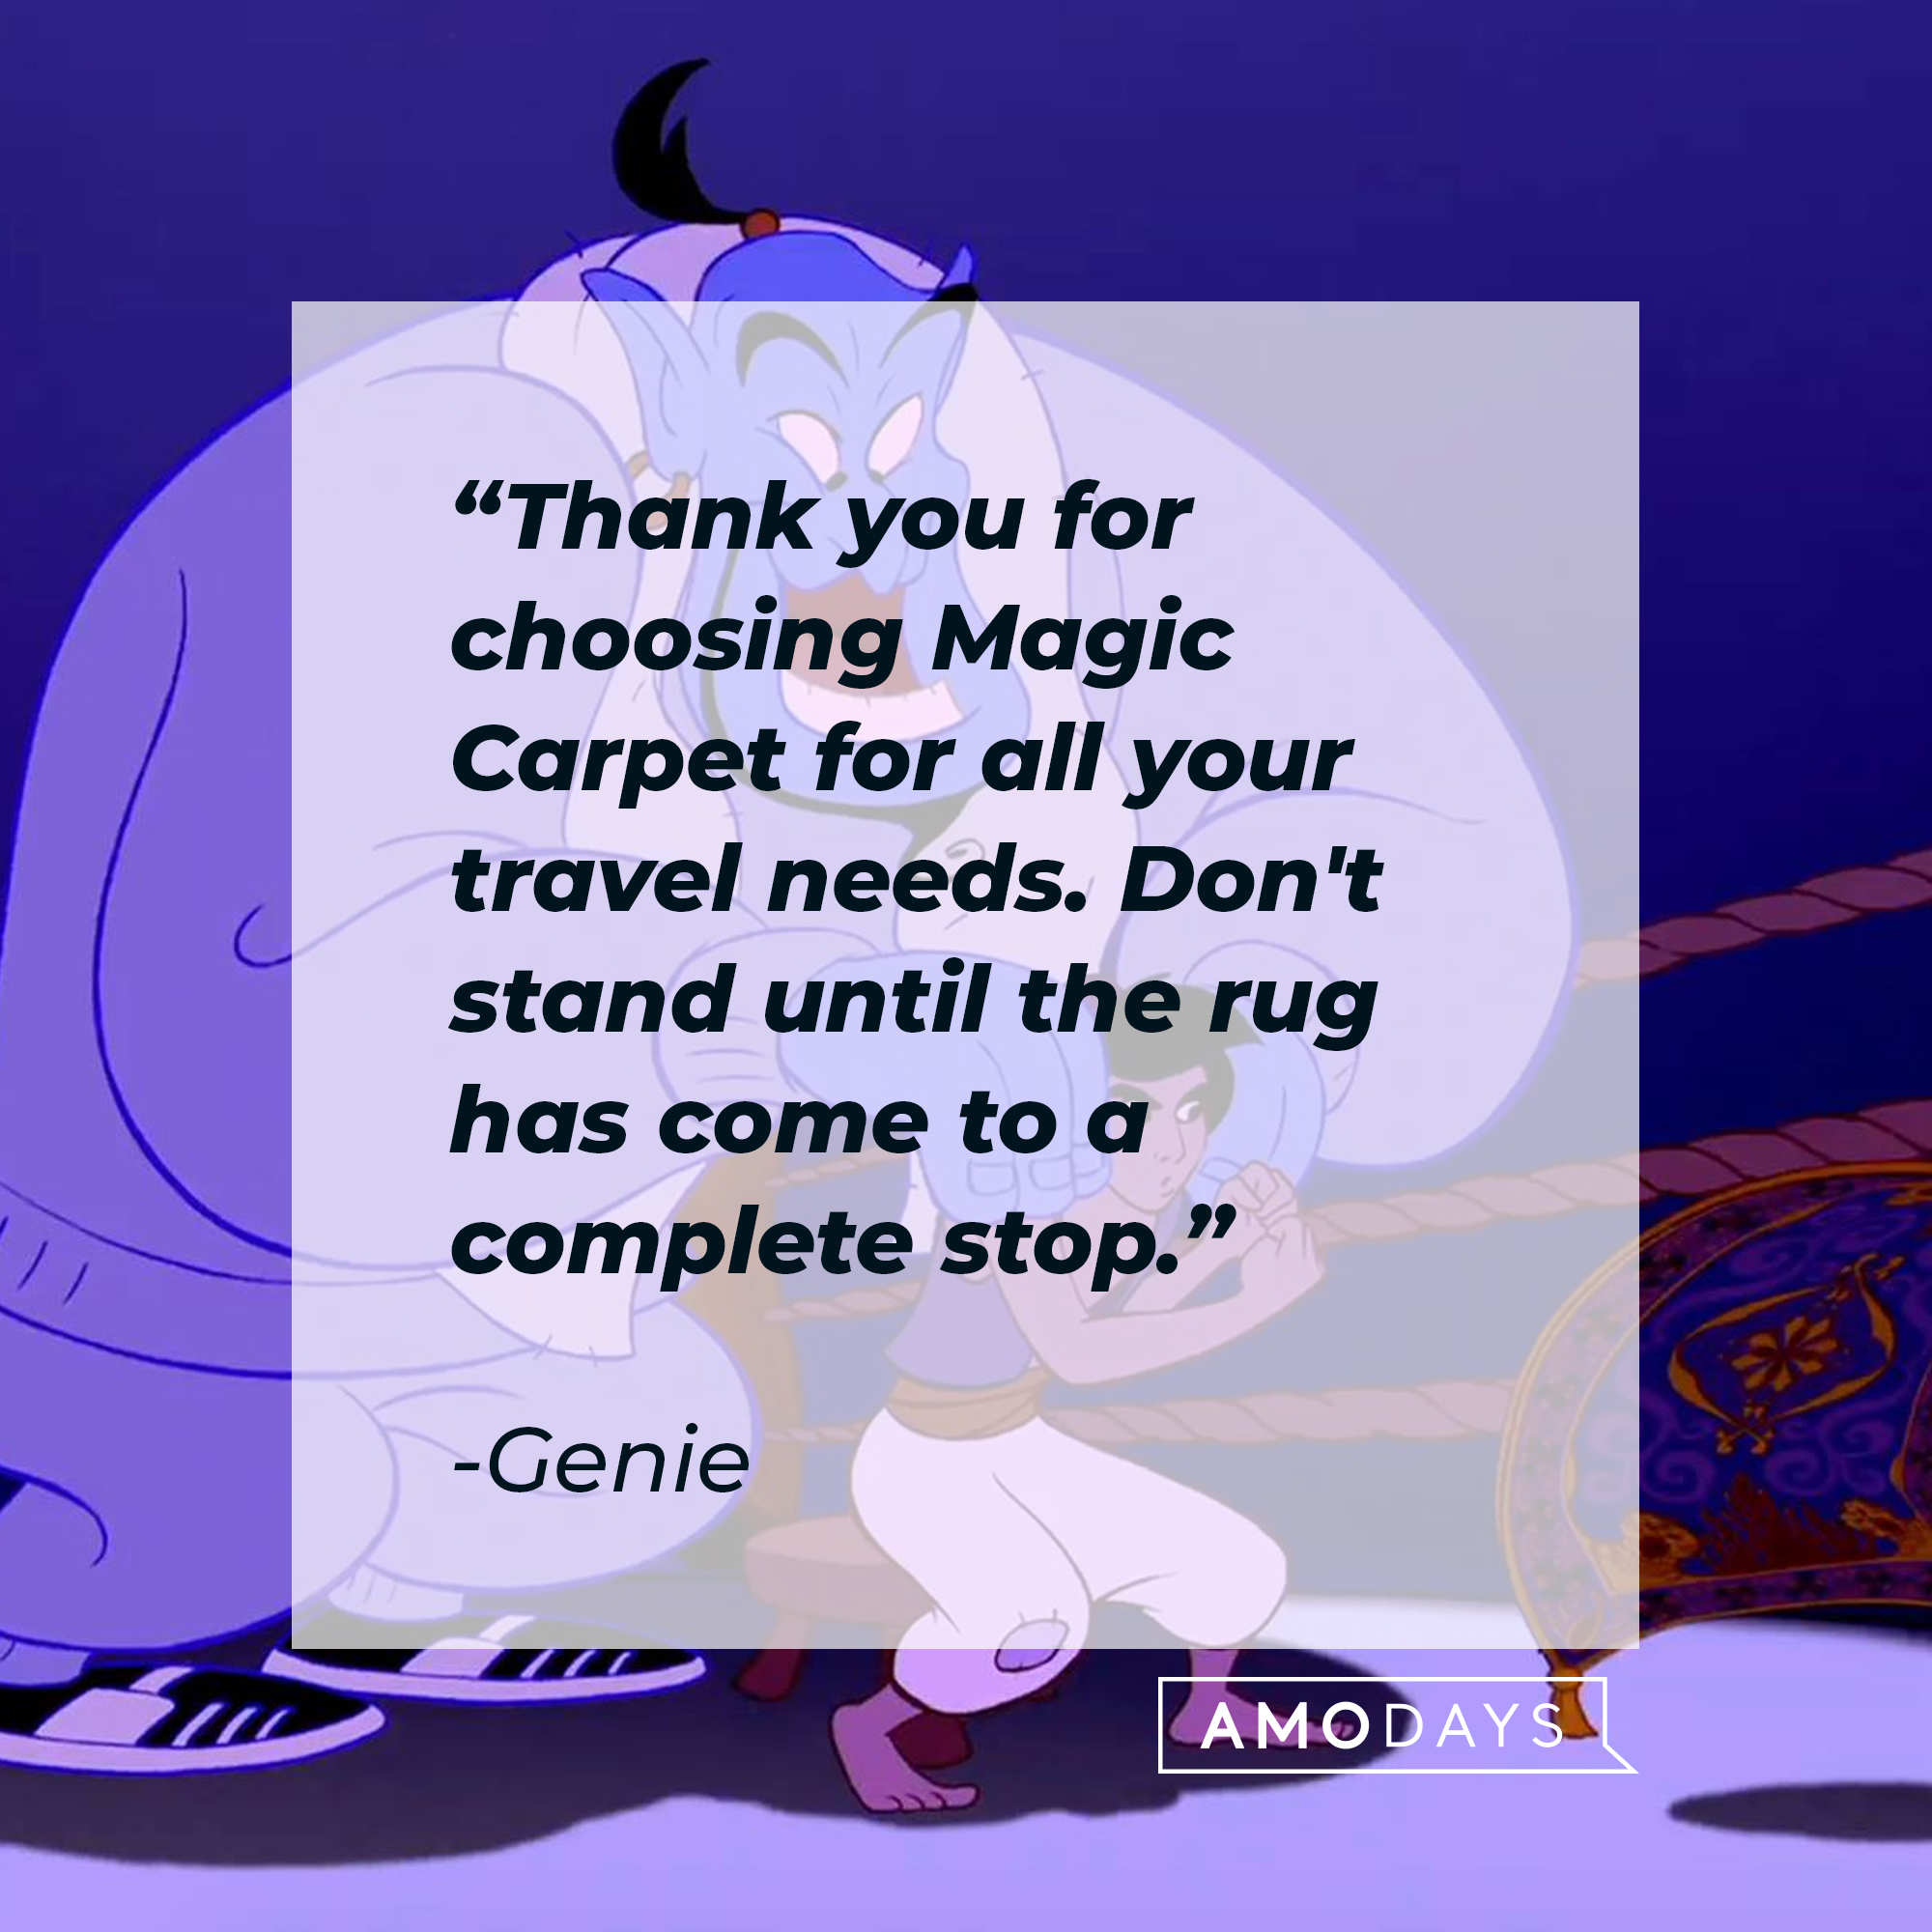 The animated Genie with his quote: "Thank you for choosing Magic Carpet for all your travel needs. Don't stand until the rug has come to a complete stop.” | Source: Facebook.com/DisneyAladdin